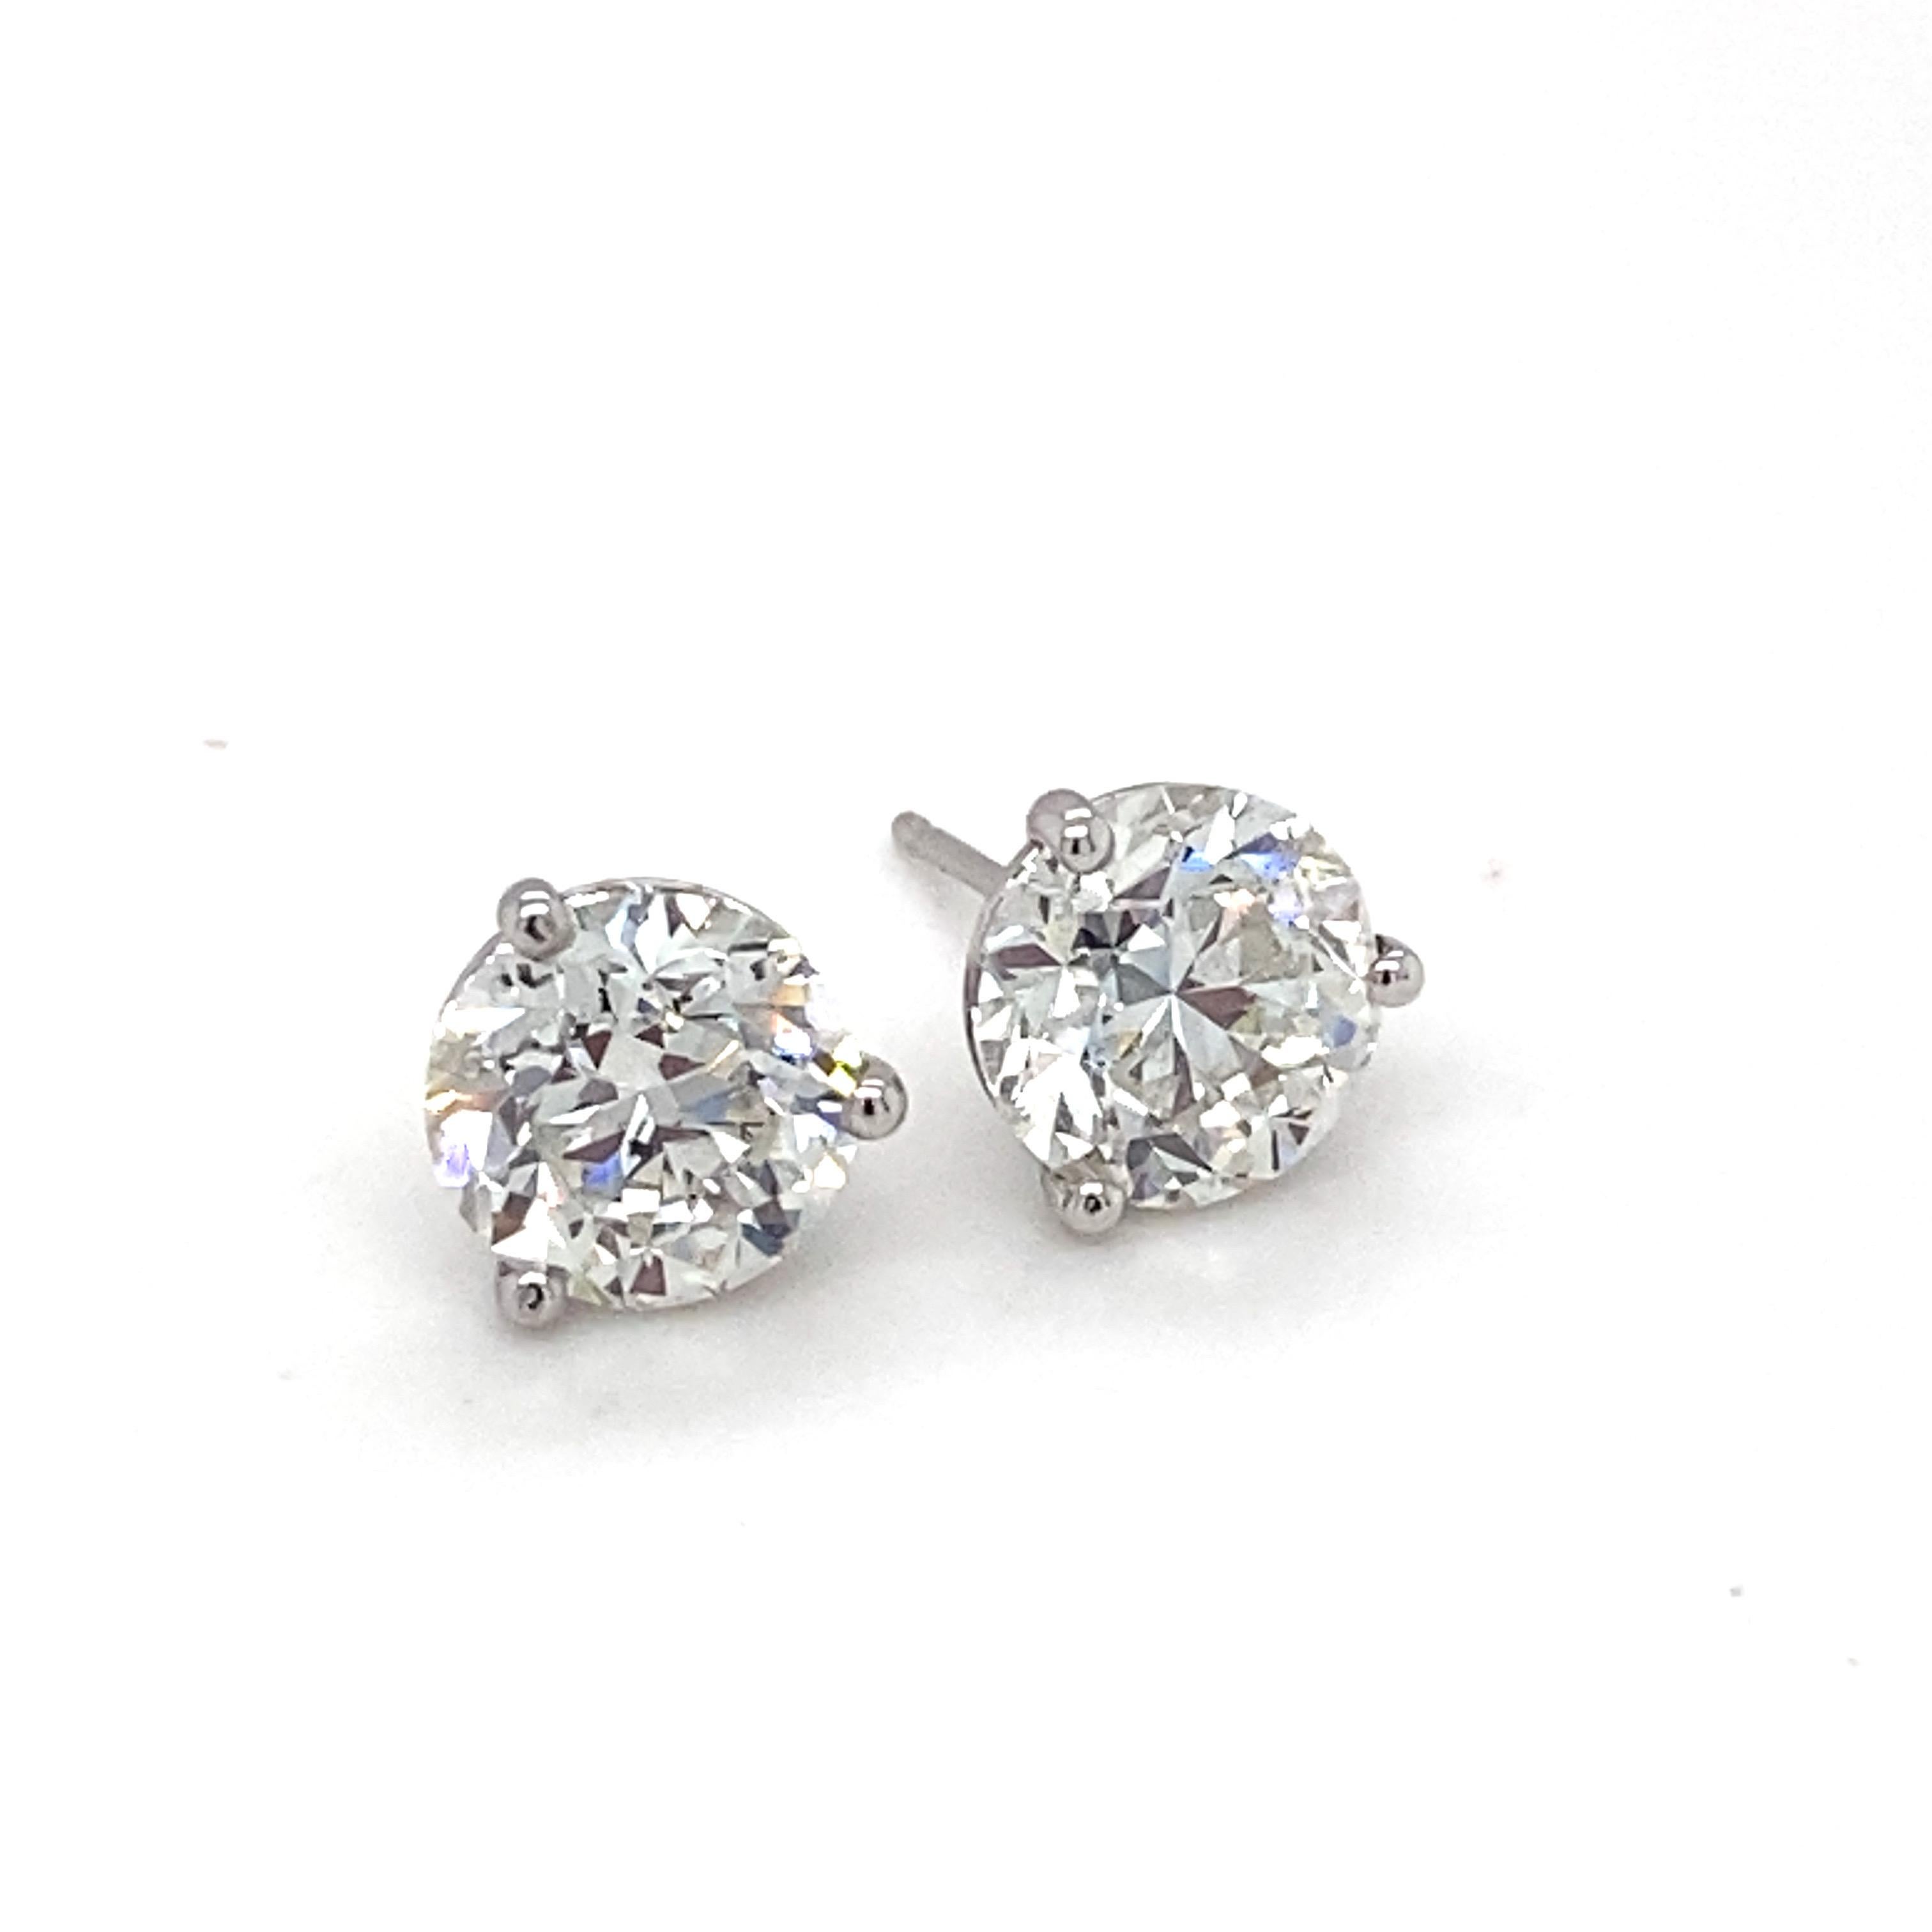 This classic stud earrings showcases GIA Certified 5.00 carat  I color two brilliant cut diamonds. Set in a three prong setting in 18K white gold is a timeless piece of jewelry which can be worn with any style of outfits.